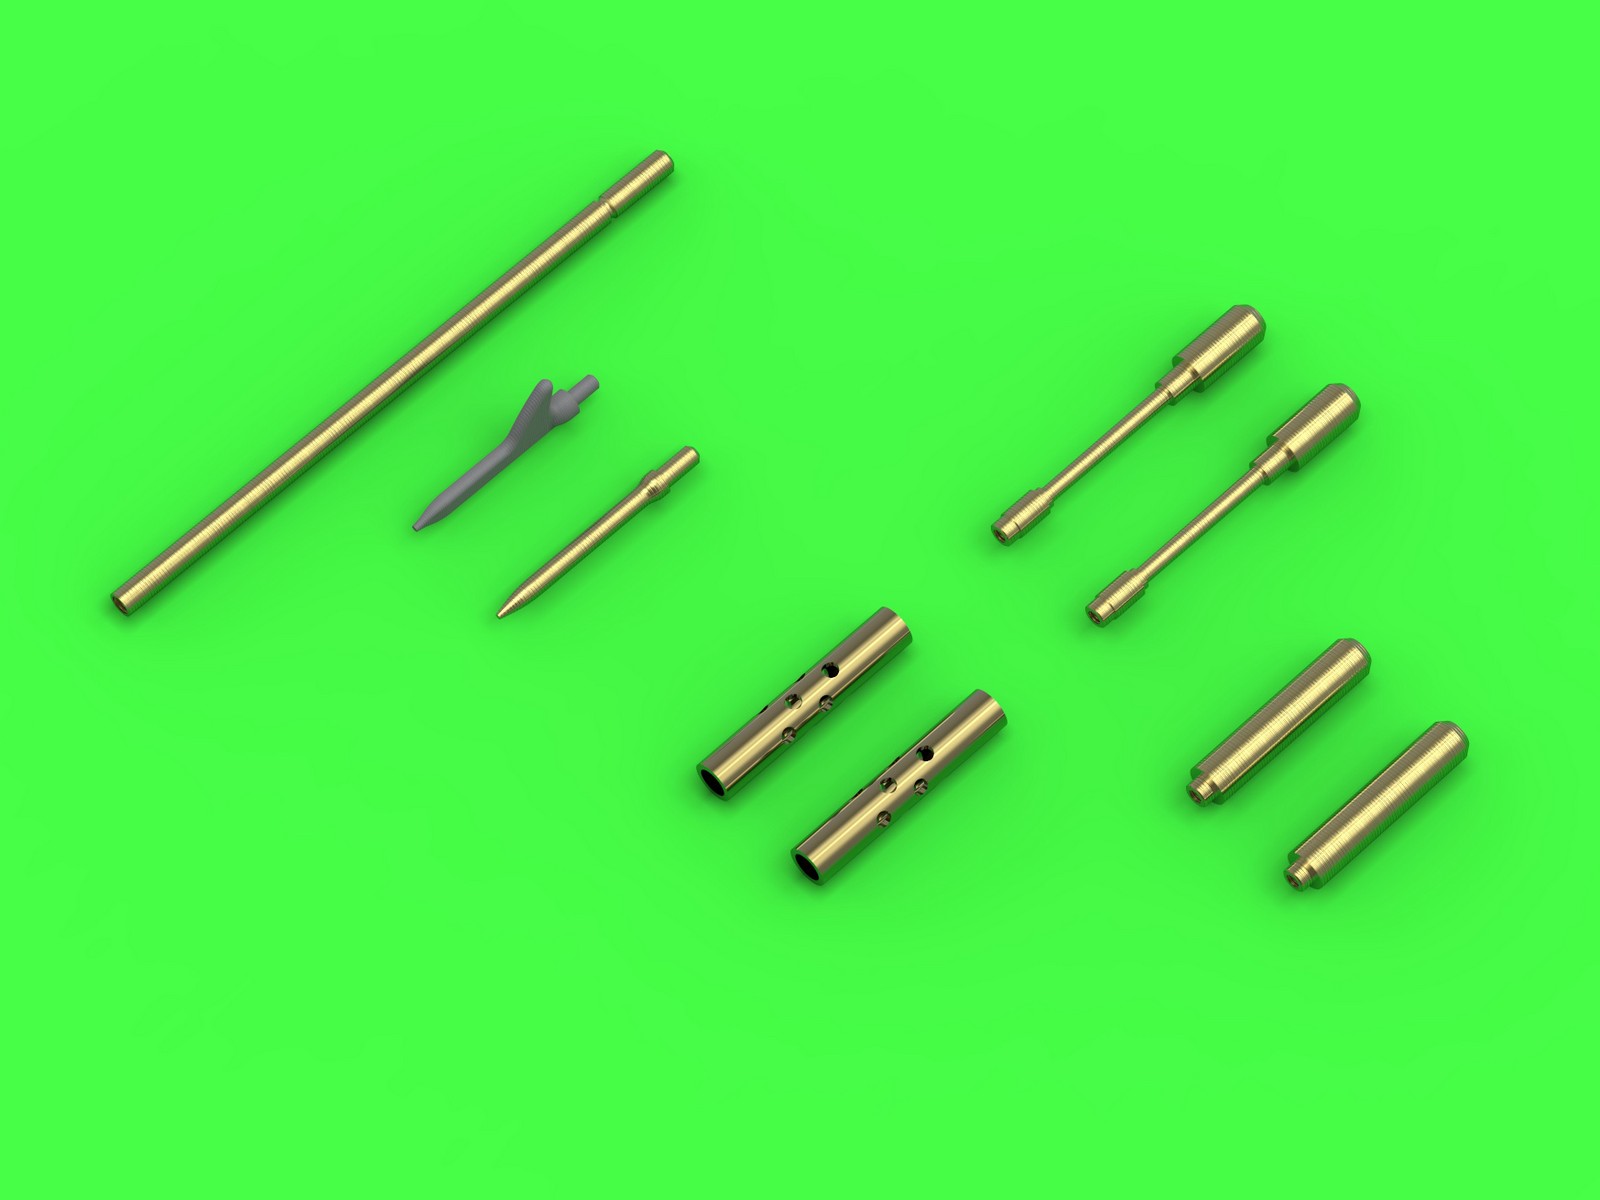 Aircraft detailing sets (brass) 1/72 Grumman F4F-3 Wildcat LATE - .50 Browning gun barrels with round holes & Pitot Tube (two options) 